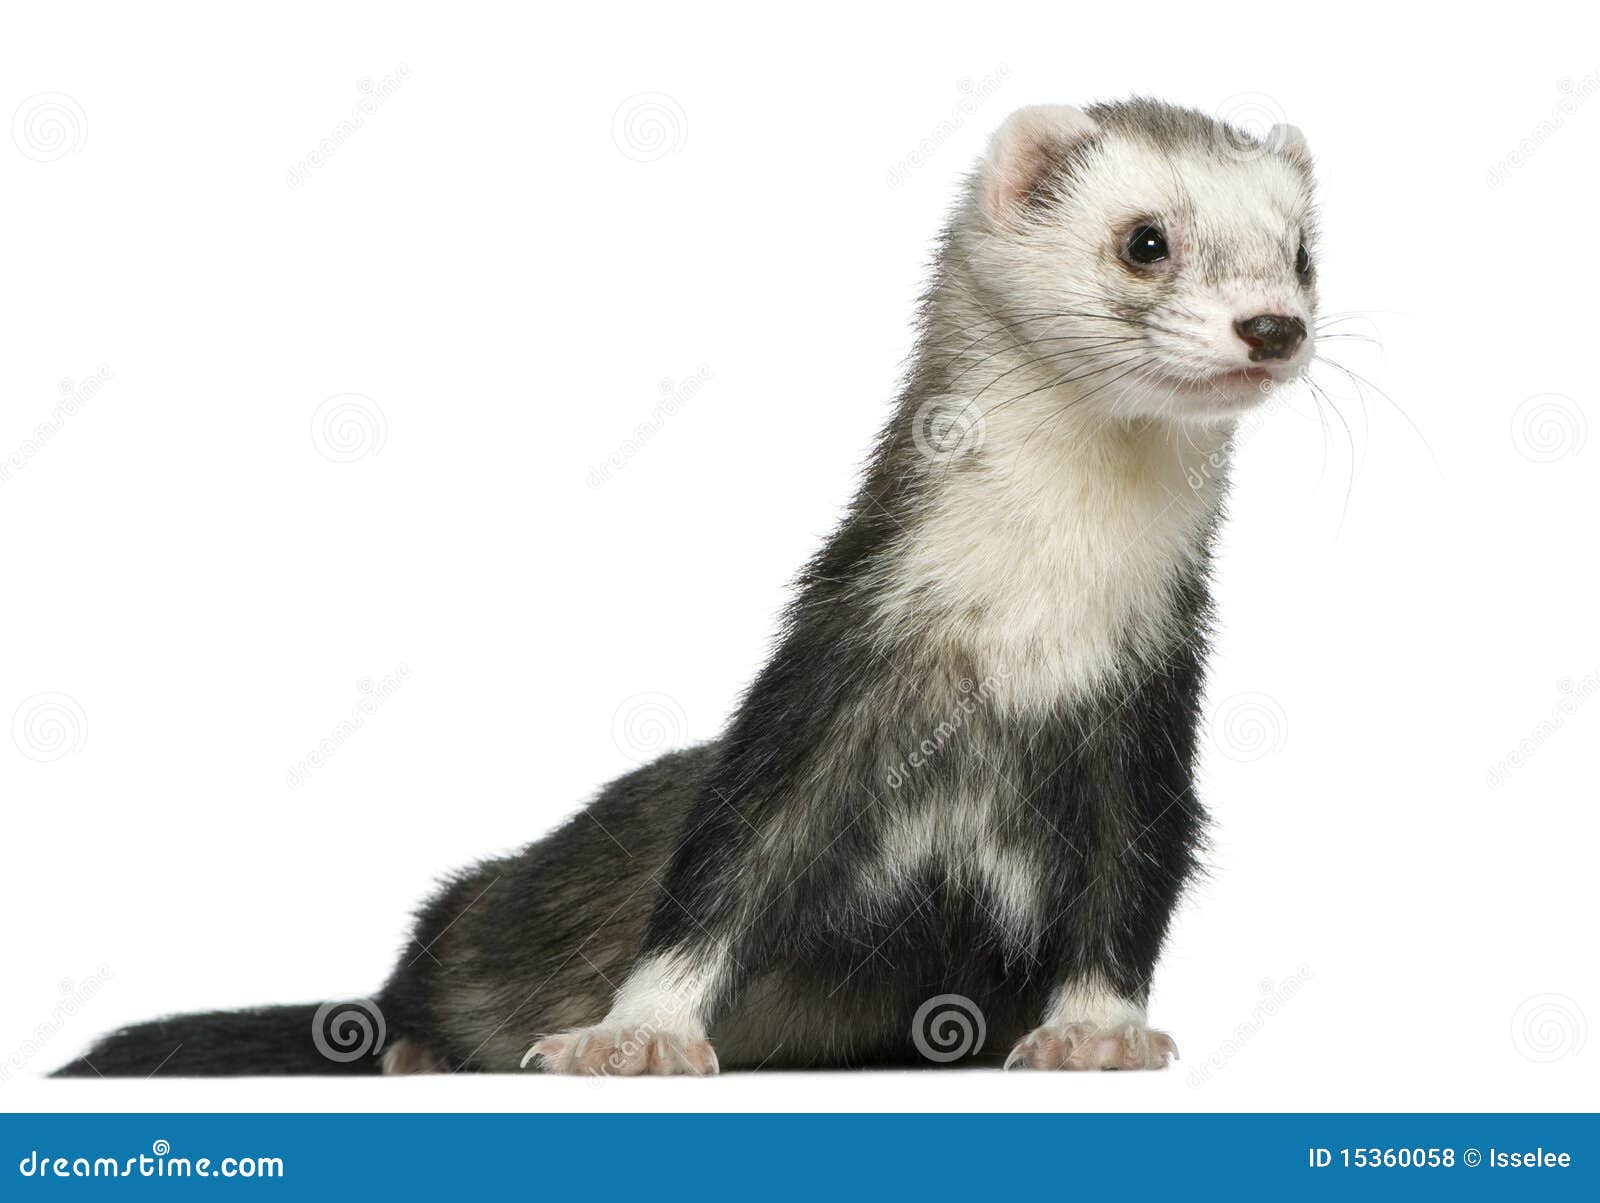 ferret, 3 and a half years old